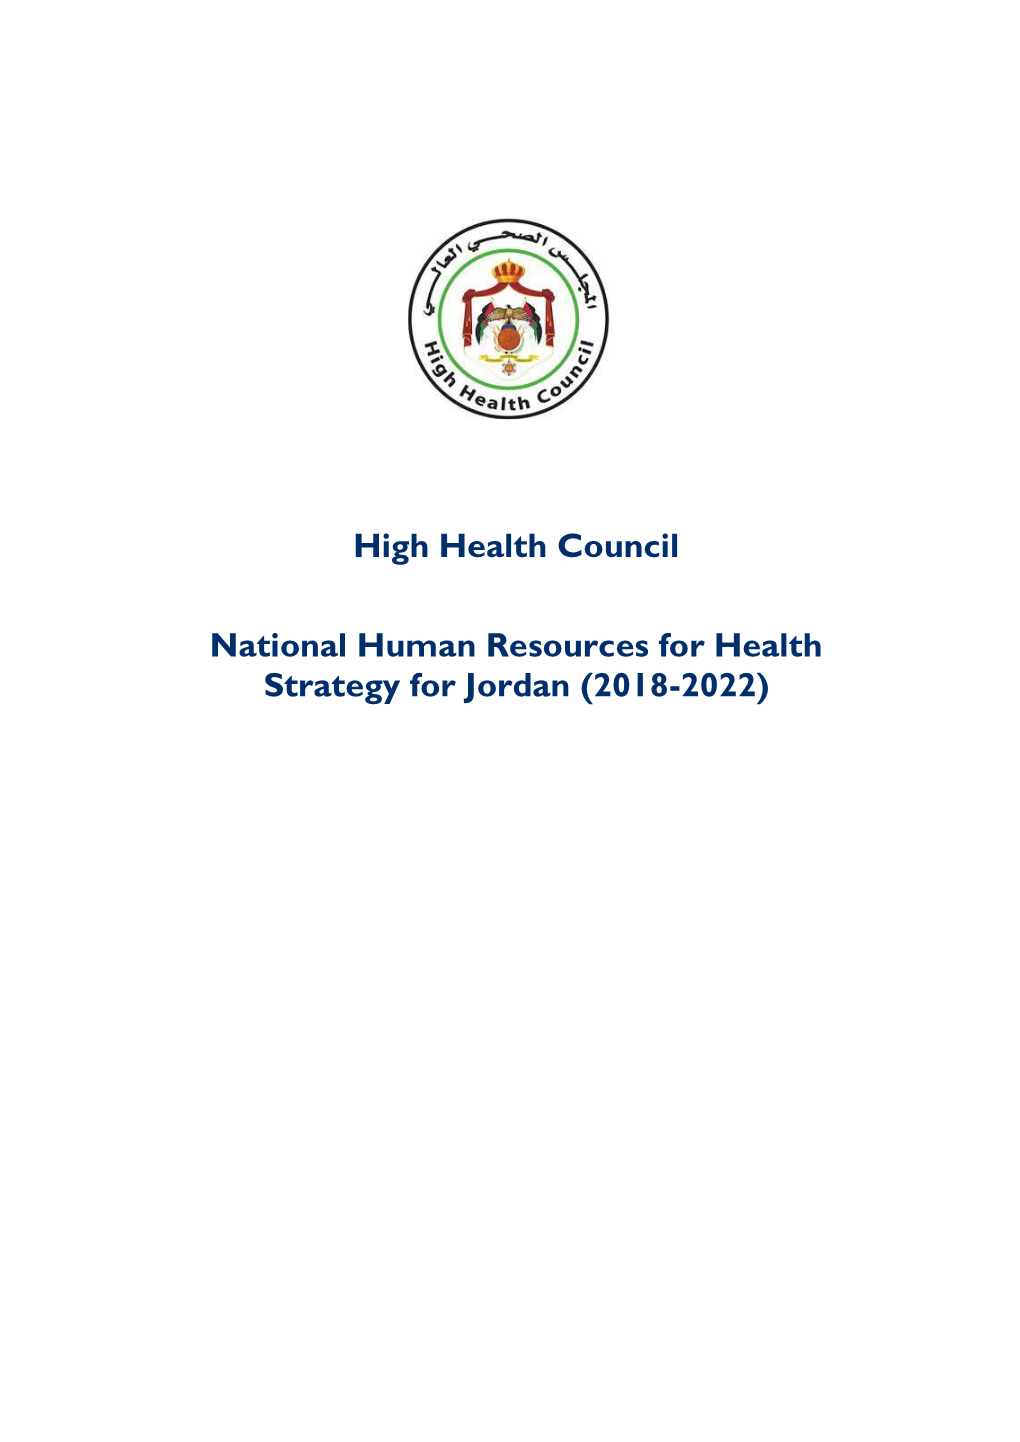 National Human Resources for Health Strategy for Jordan 2018-2022